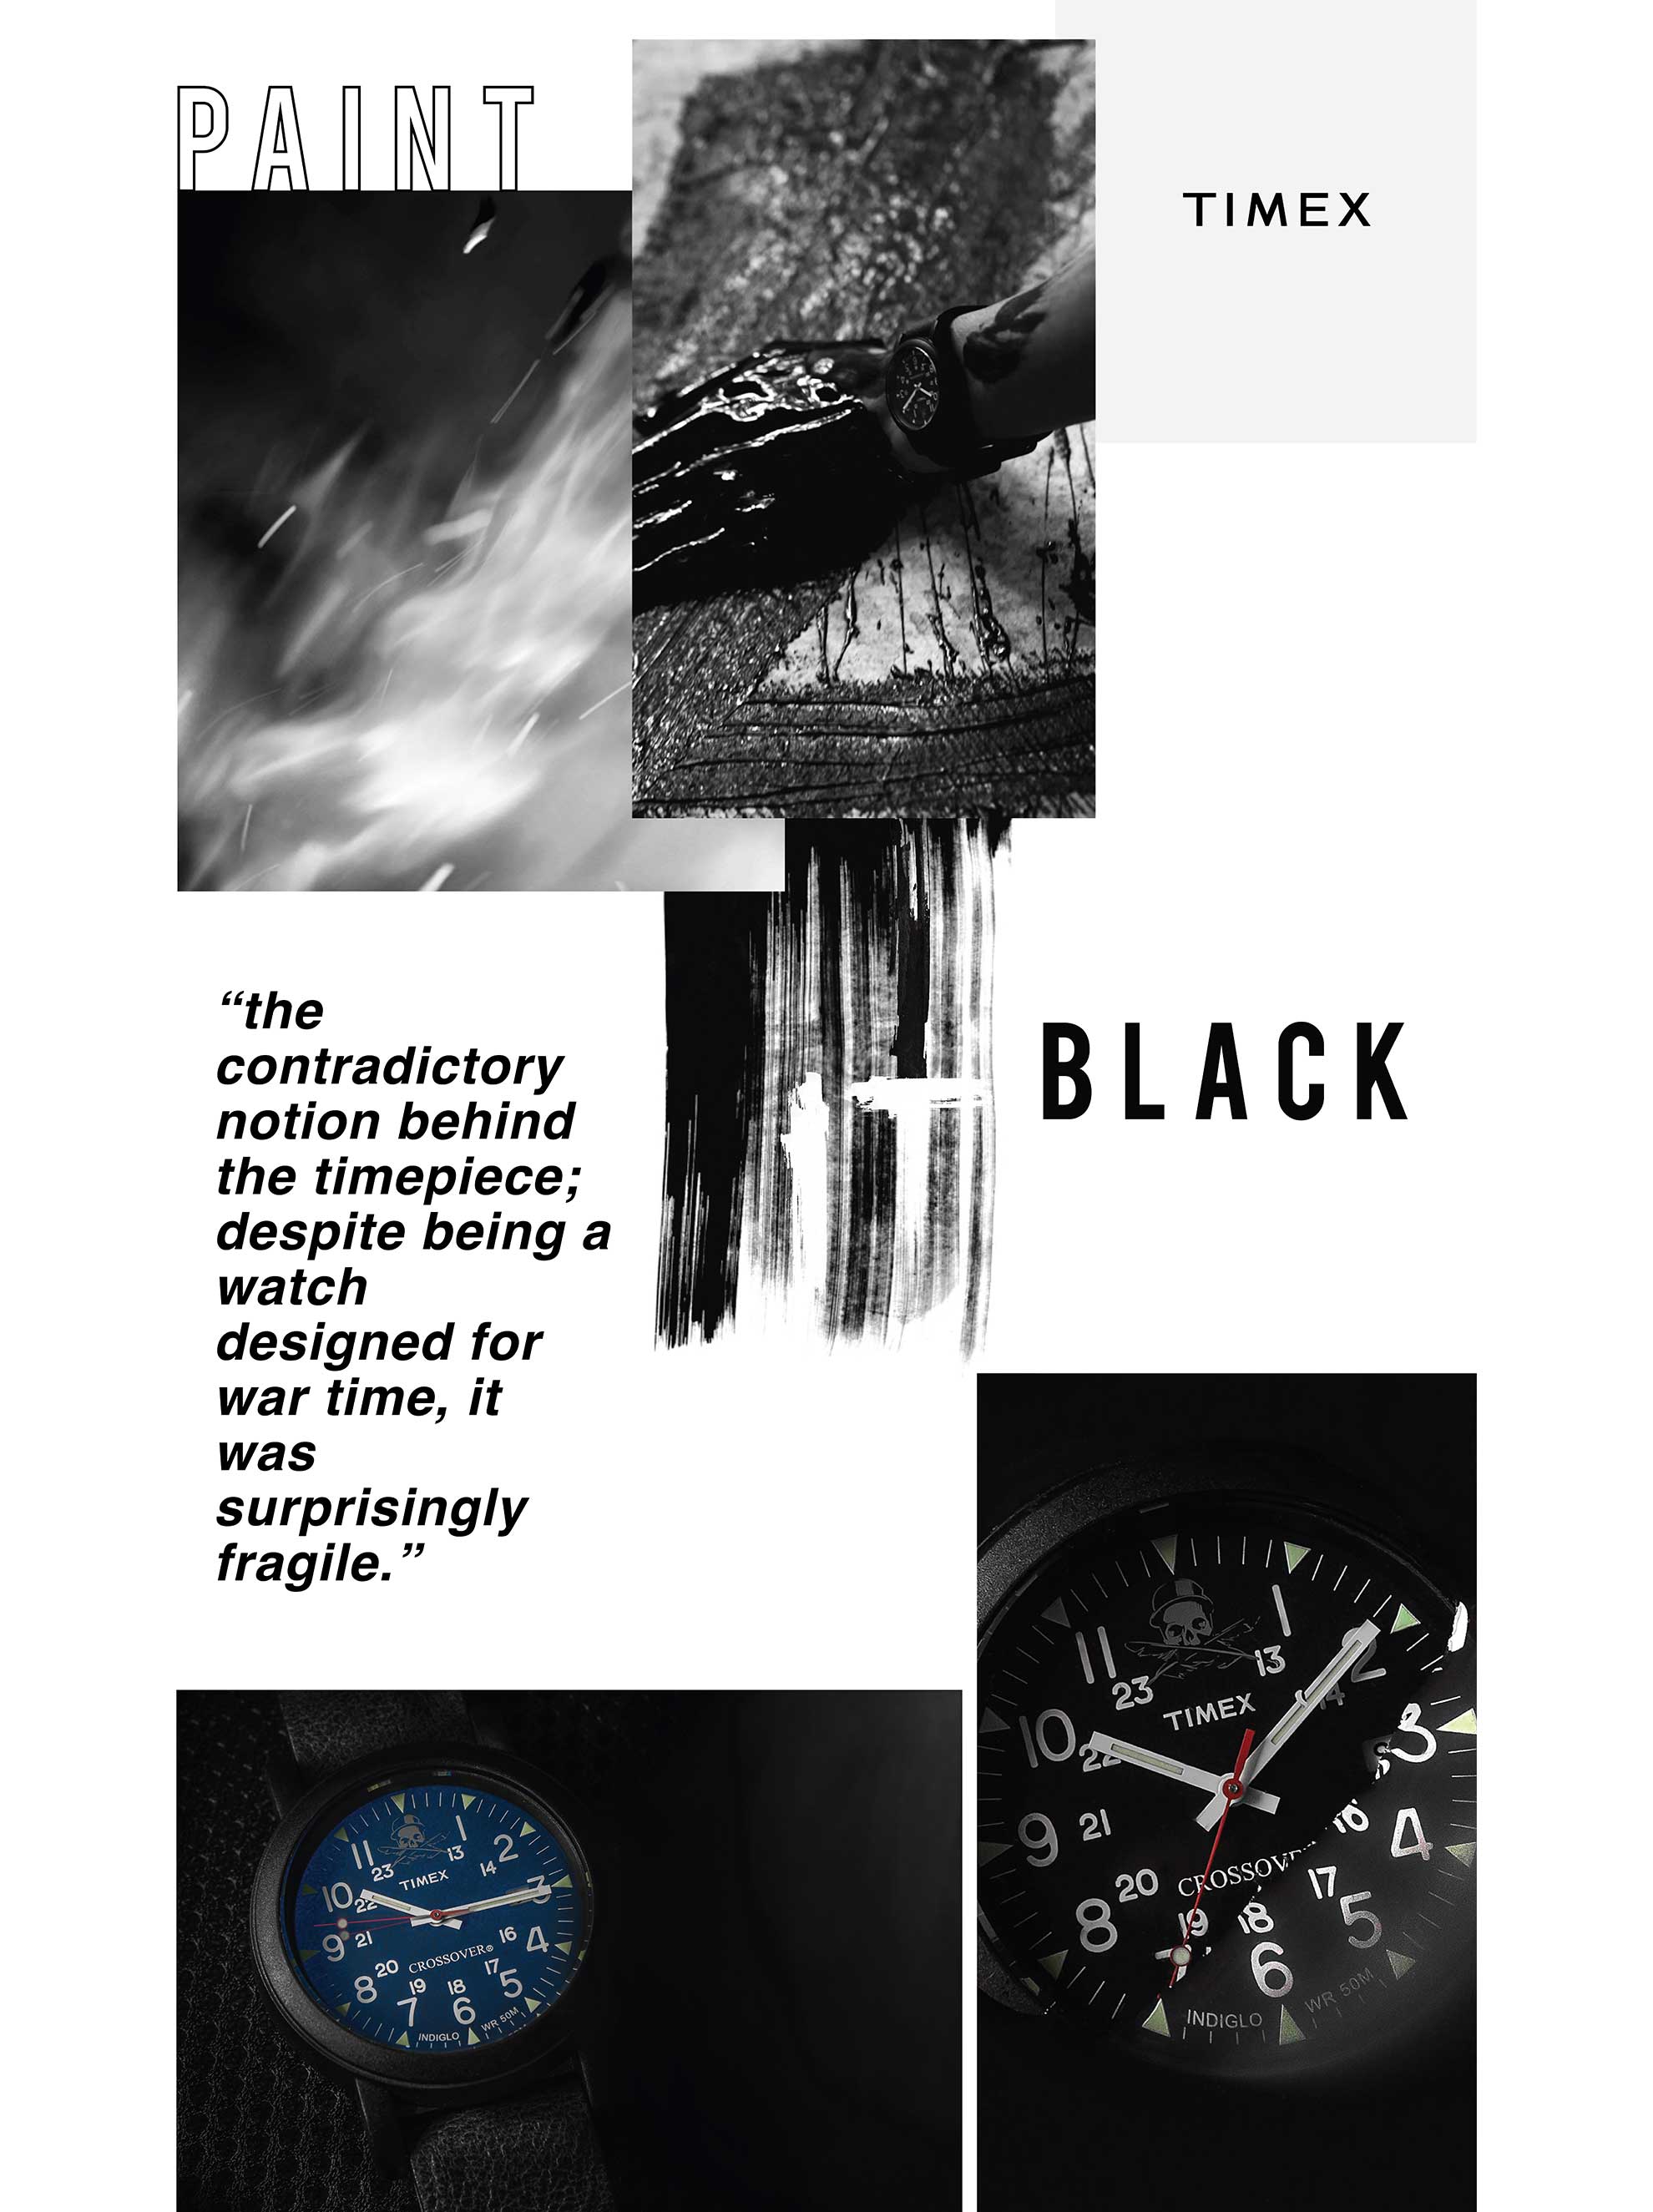 TIMEX X CROSSOVER "PAINT IT BLACK" CAMPER